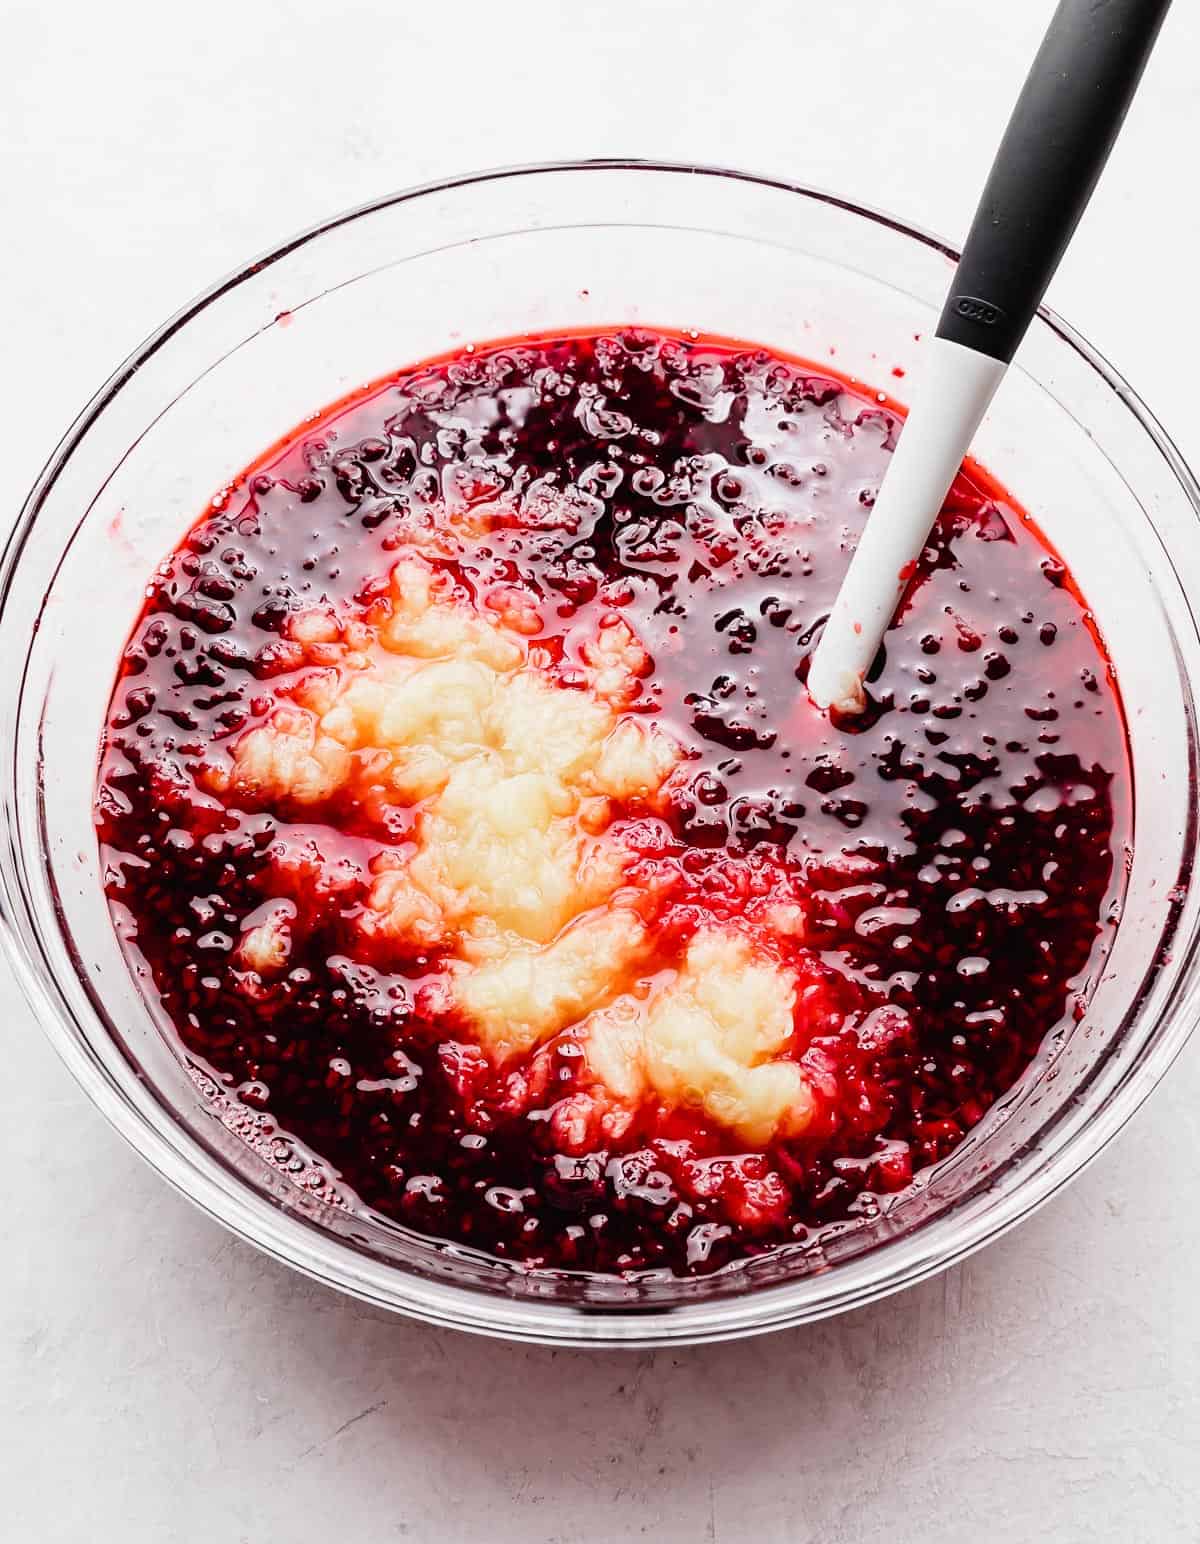 Crushed pineapple in a dark red liquid Pomegranate Jell-O solution.